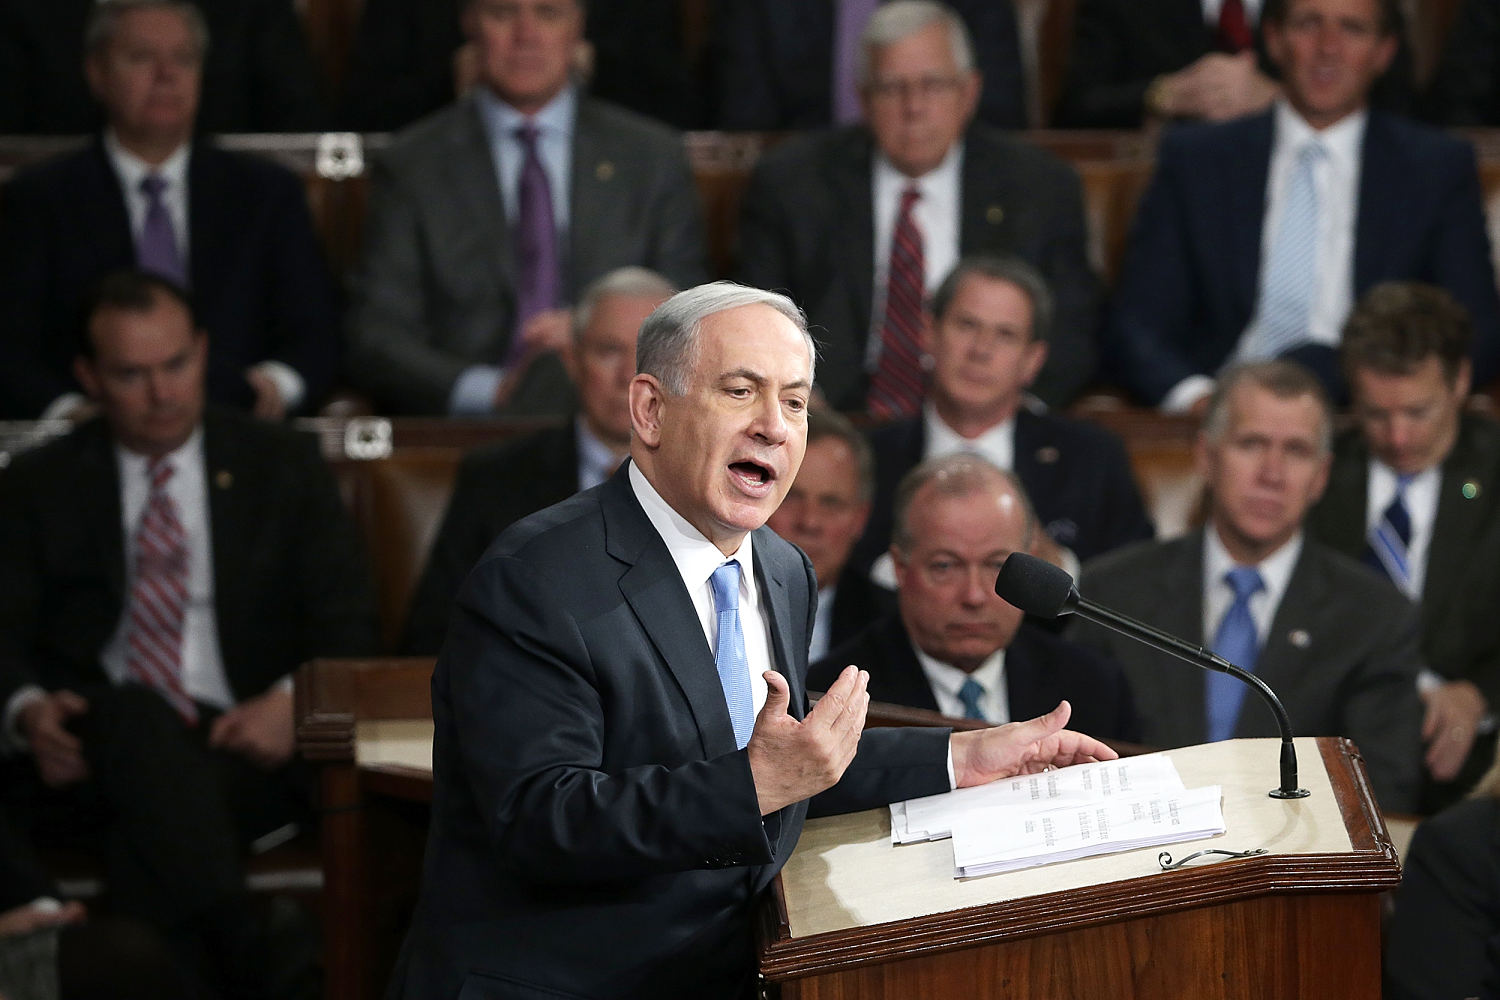 Another Democrat has plans to ditch Netanyahu's speech. More could follow.